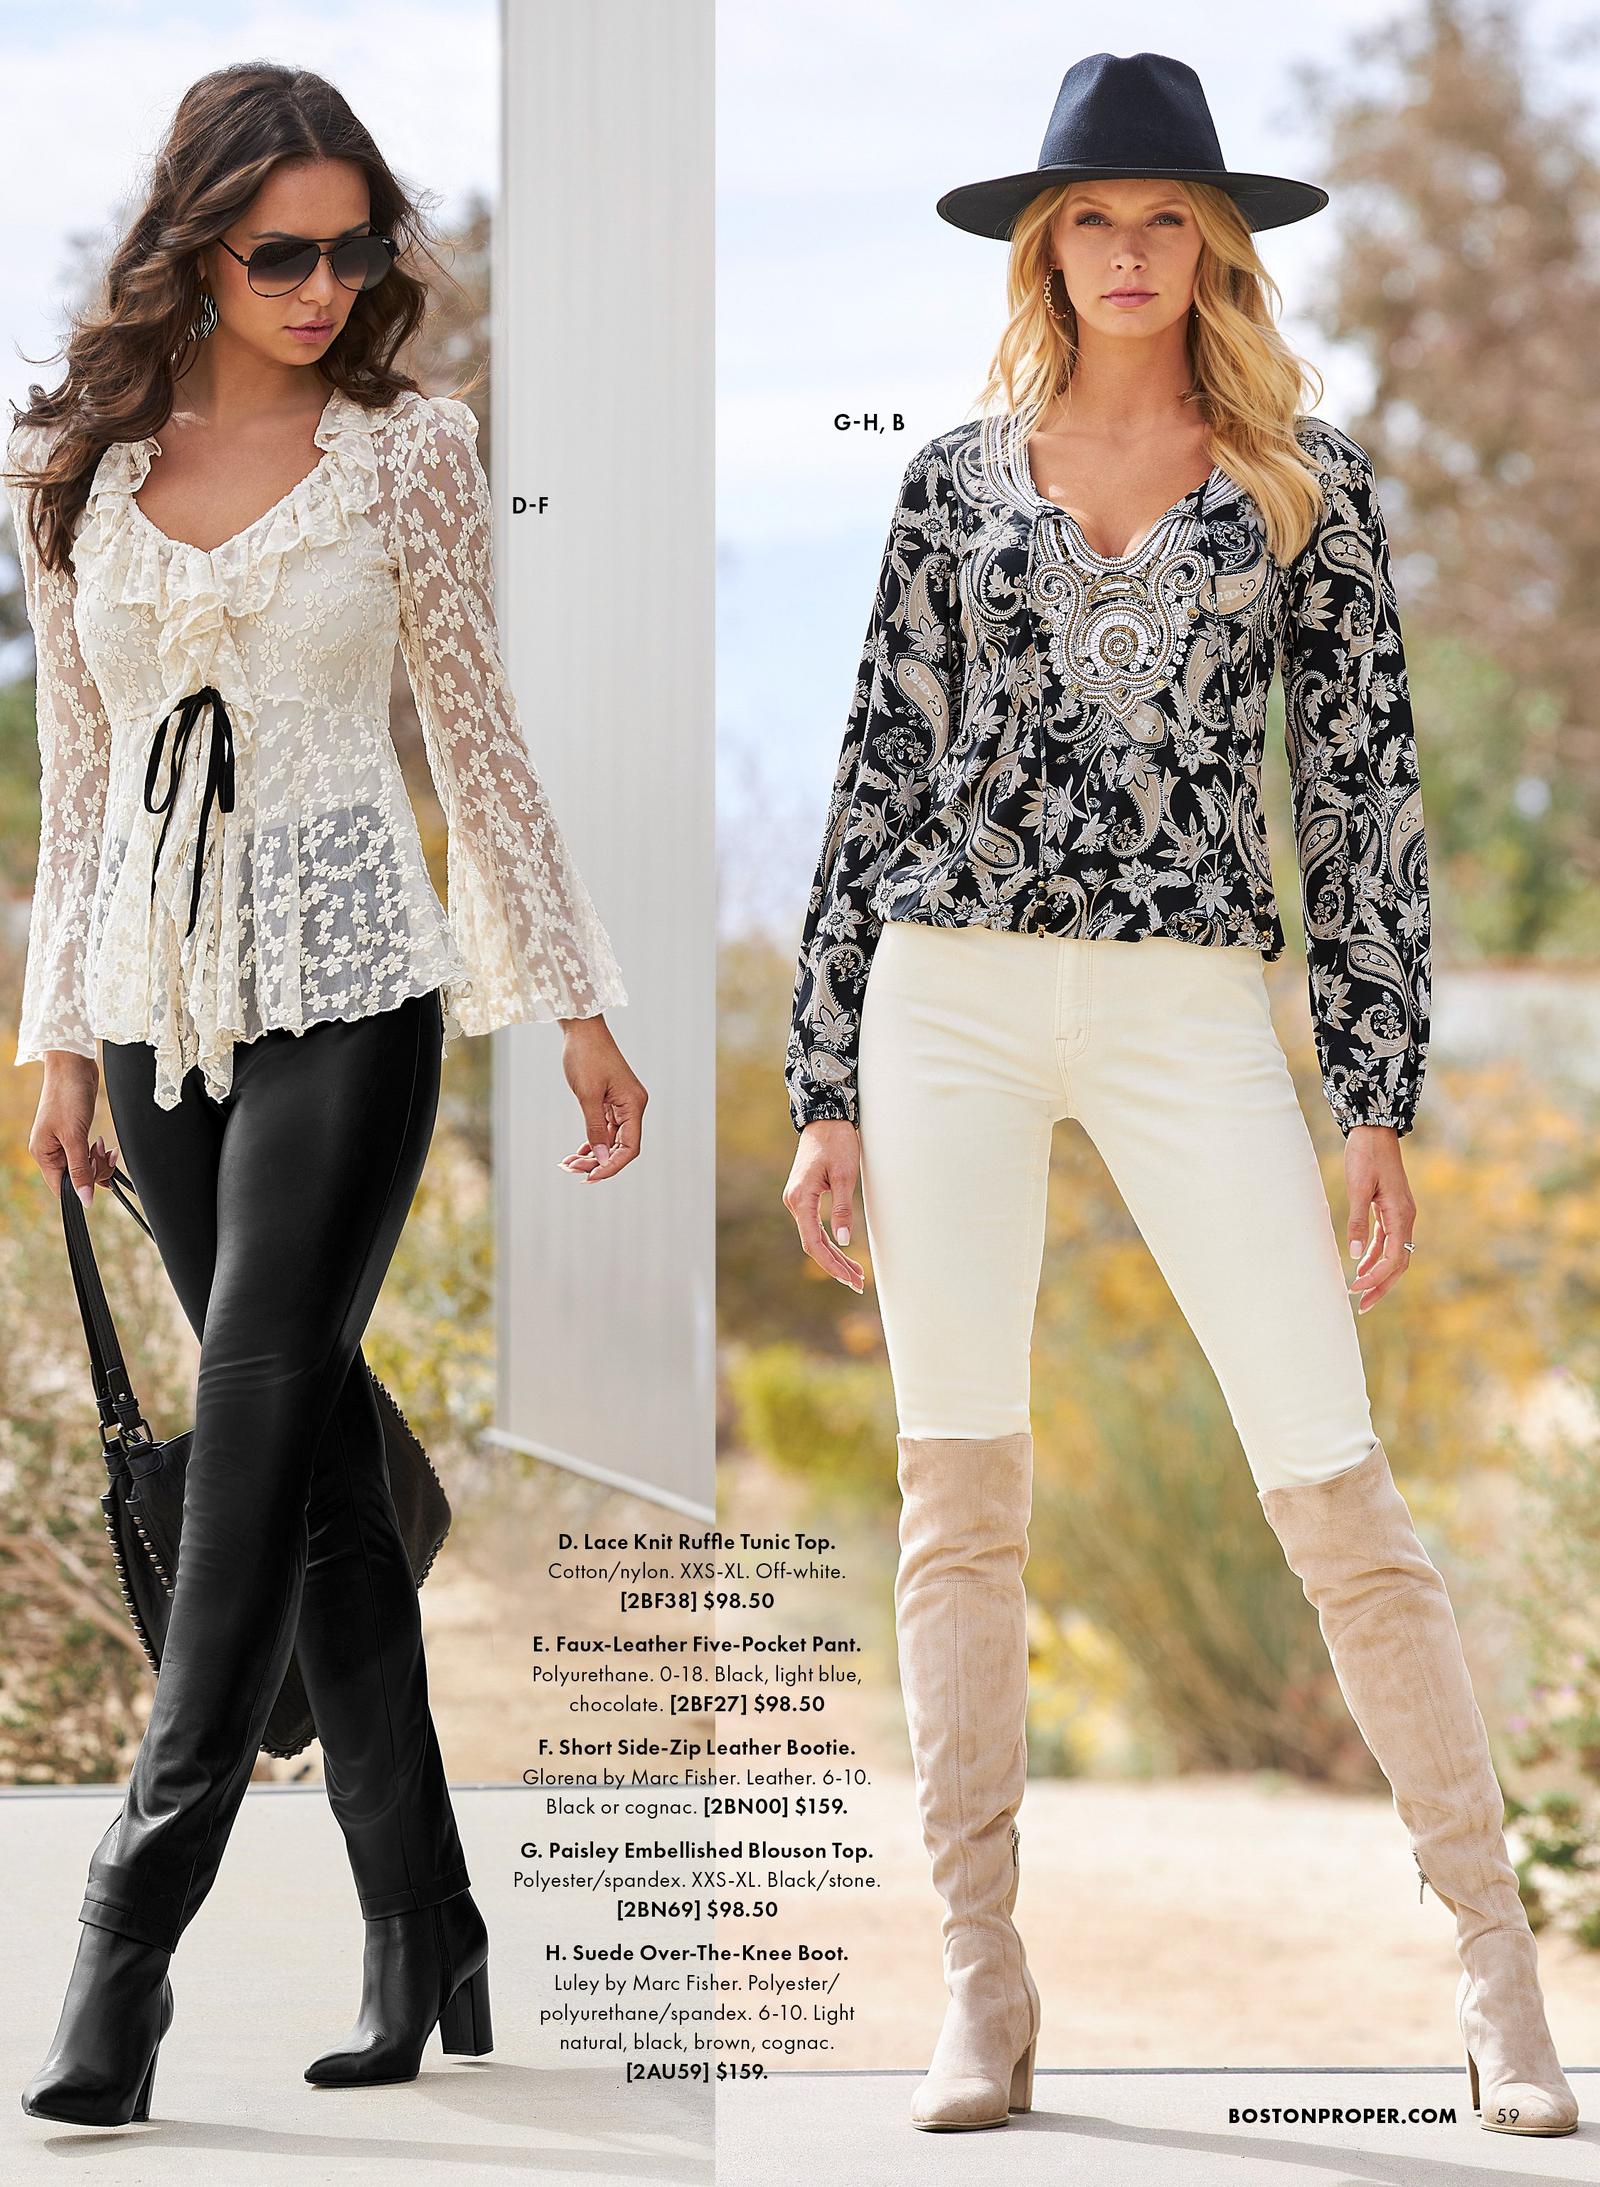 Model on the left is wearing the lace knit ruffle tunic top, the faux leather five pocket pant and the short side zip leather bootie. Model on the right wears the paisley embellished blouson top, the suede over the knee boot and the proper high rise slim straight leg jean.